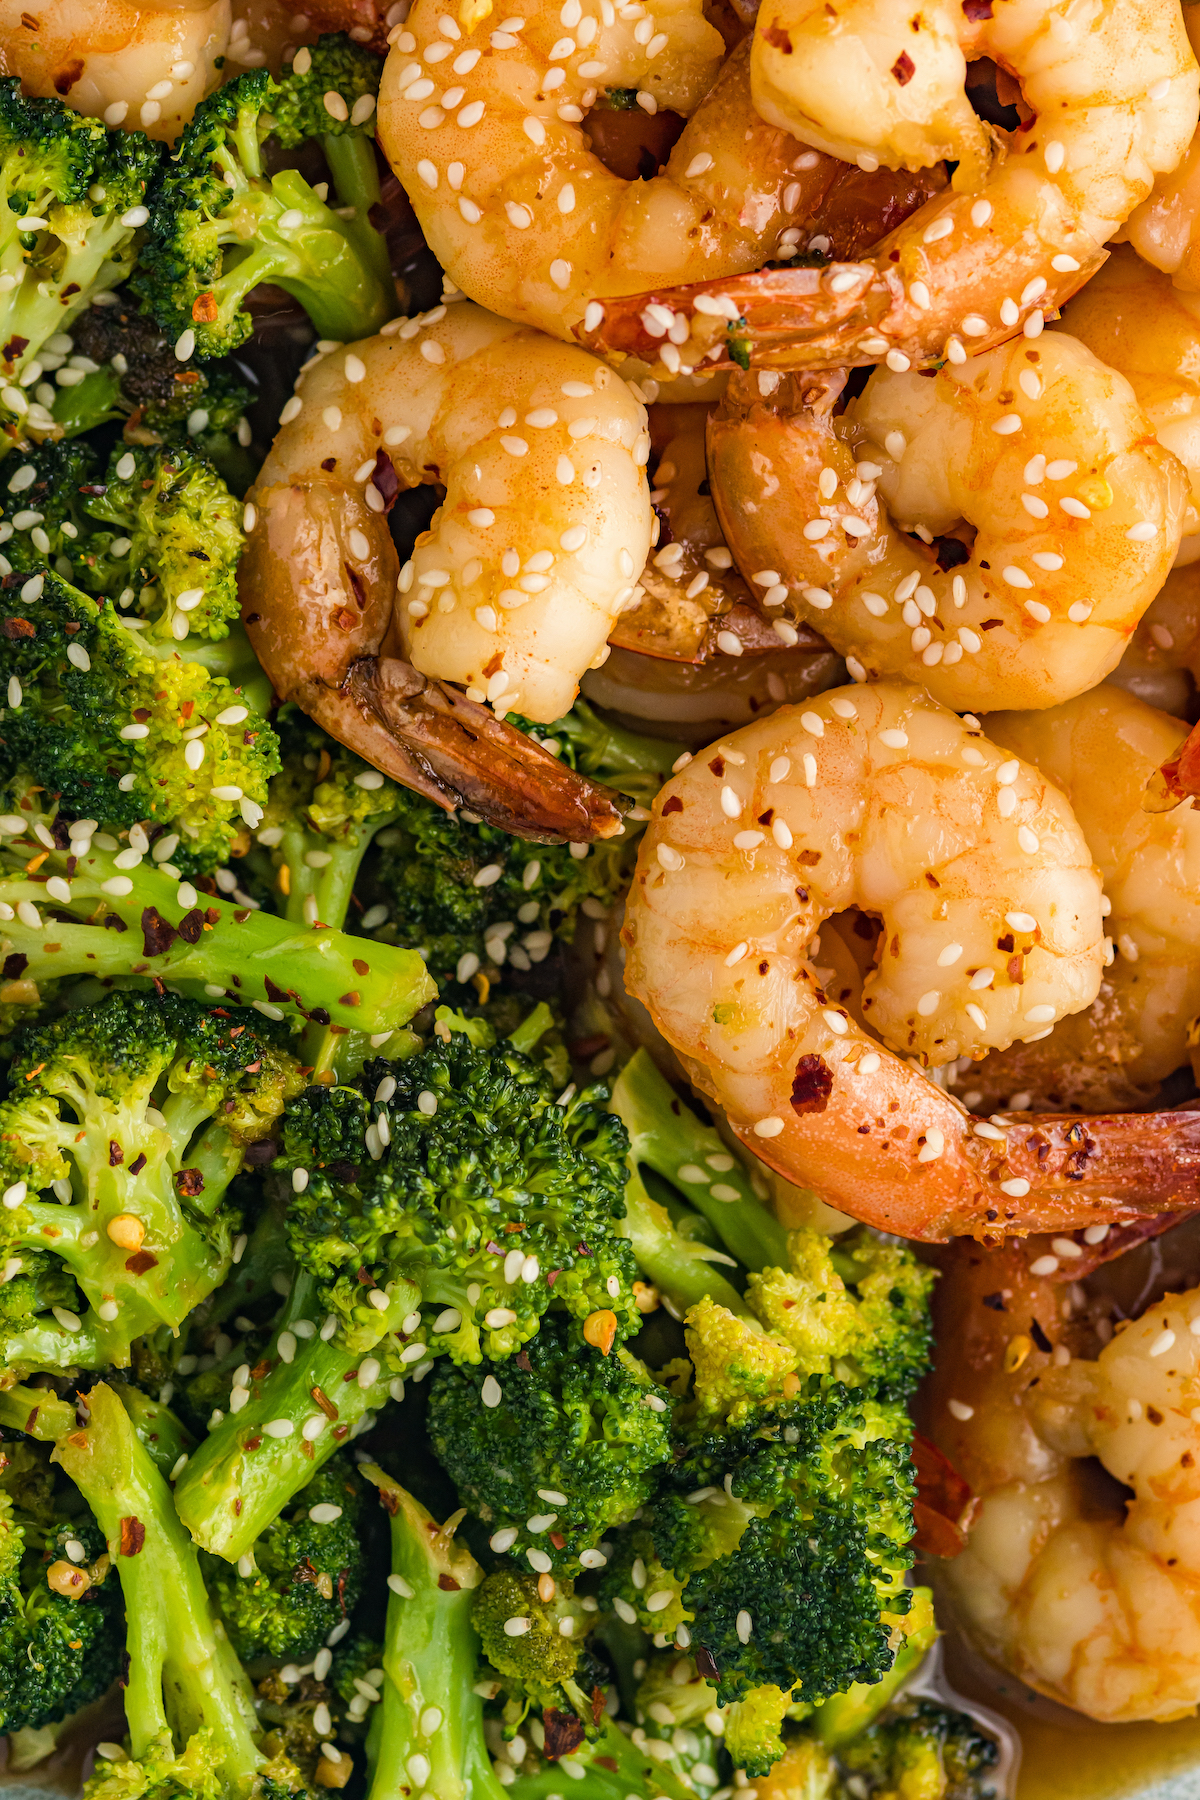 Closeup of cooked shrimp and broccoli that has been garnished with white sesame seeds and red pepper flakes.